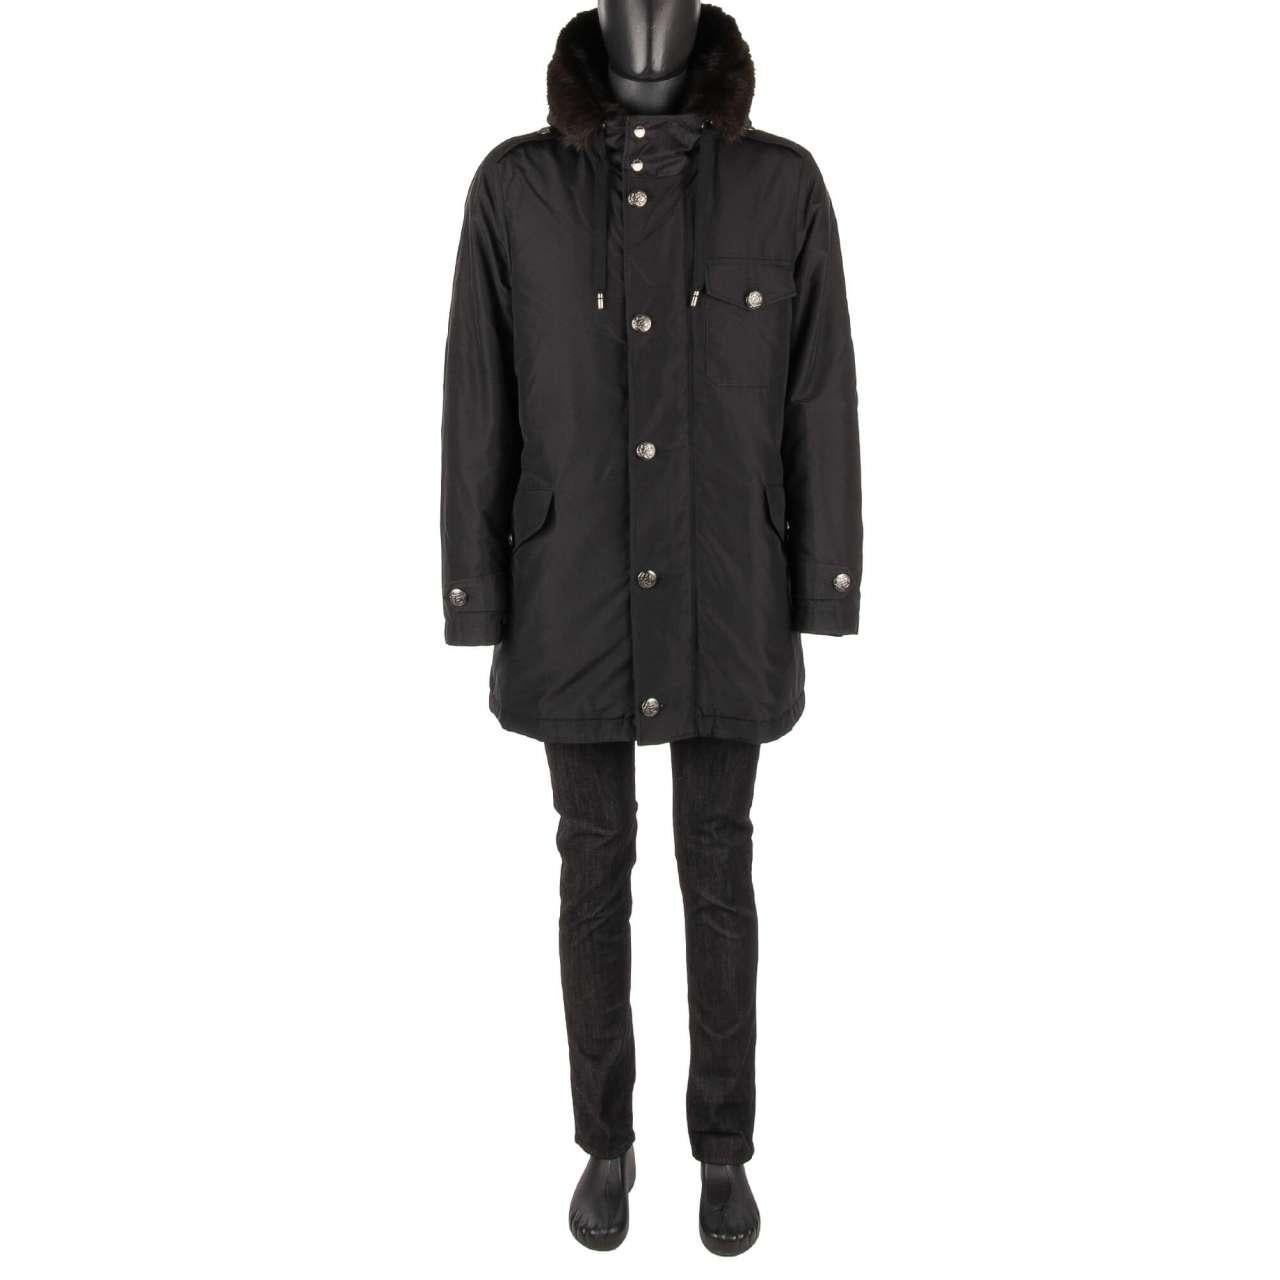 Dolce & Gabbana Silk Parka Jacket with Detachable Fur Lining and Hoody Black 56 For Sale 2